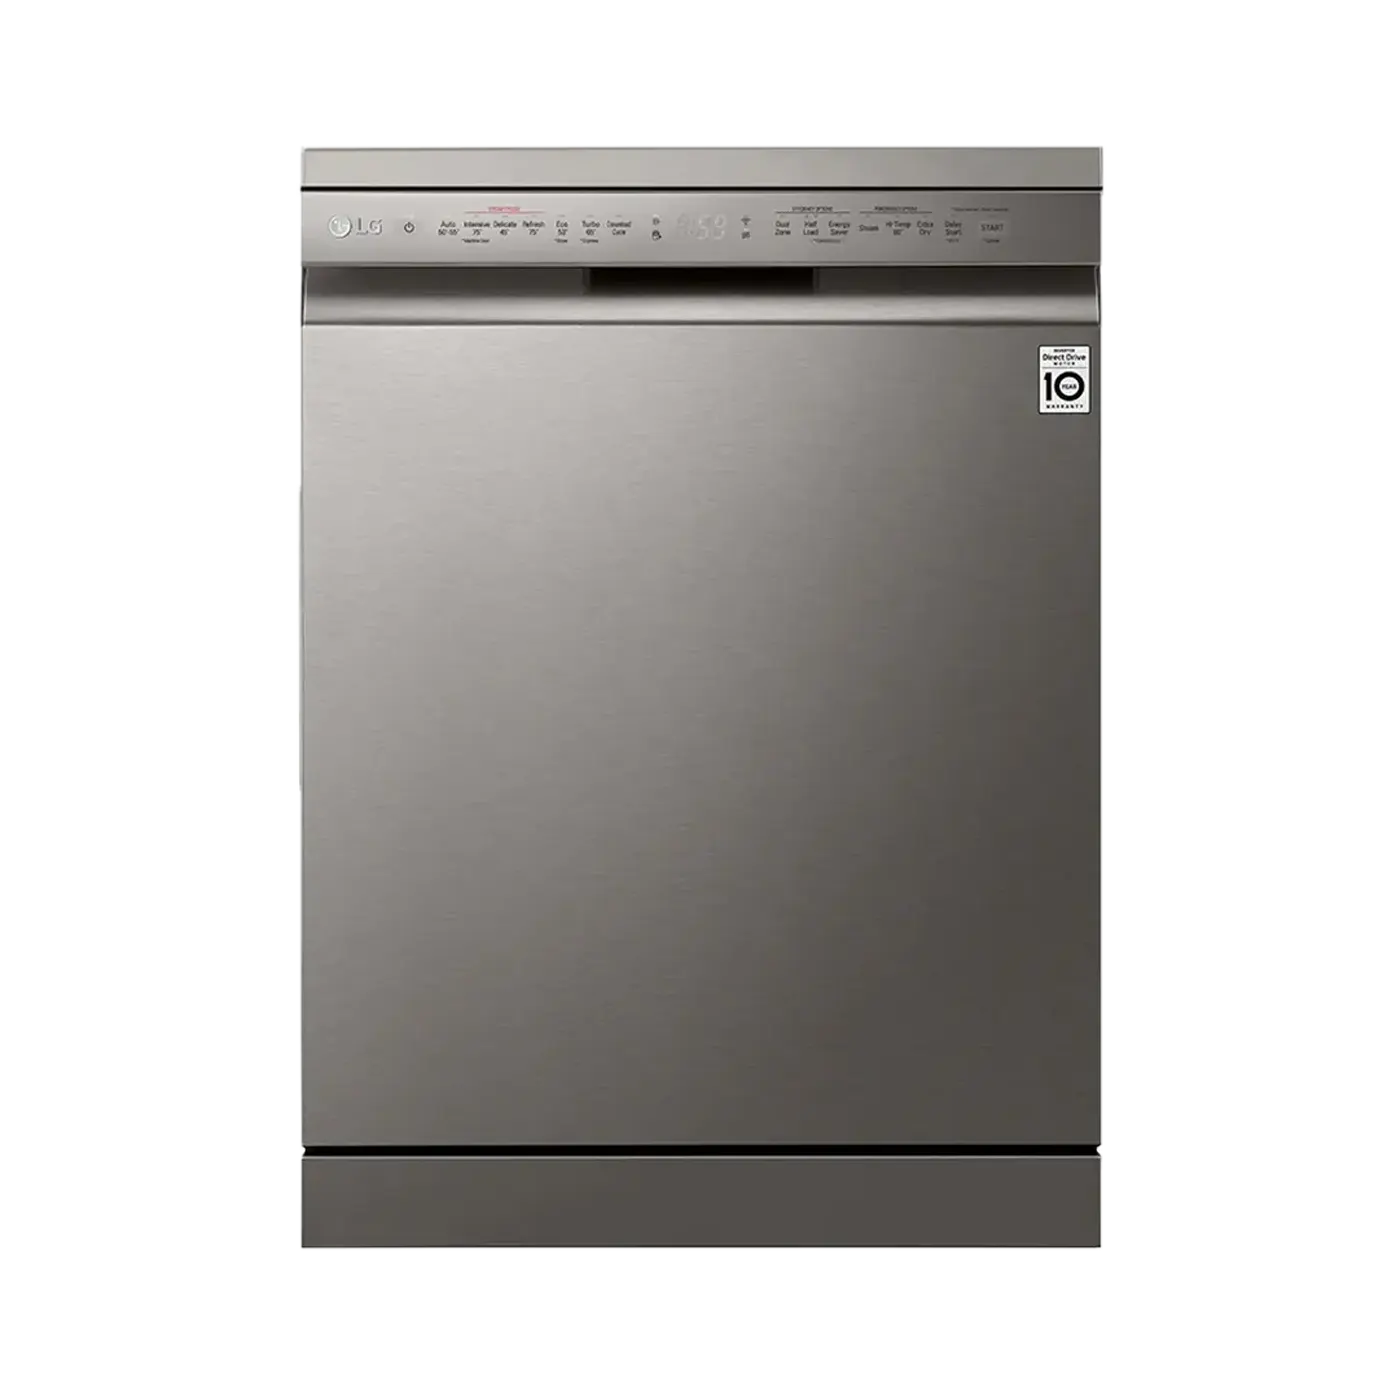 LG - 14 Place Settings Wi - Fi Dishwasher (DFB424FP, Silver, Silent Operation, Tough Stain Removal, Adjustable racks )